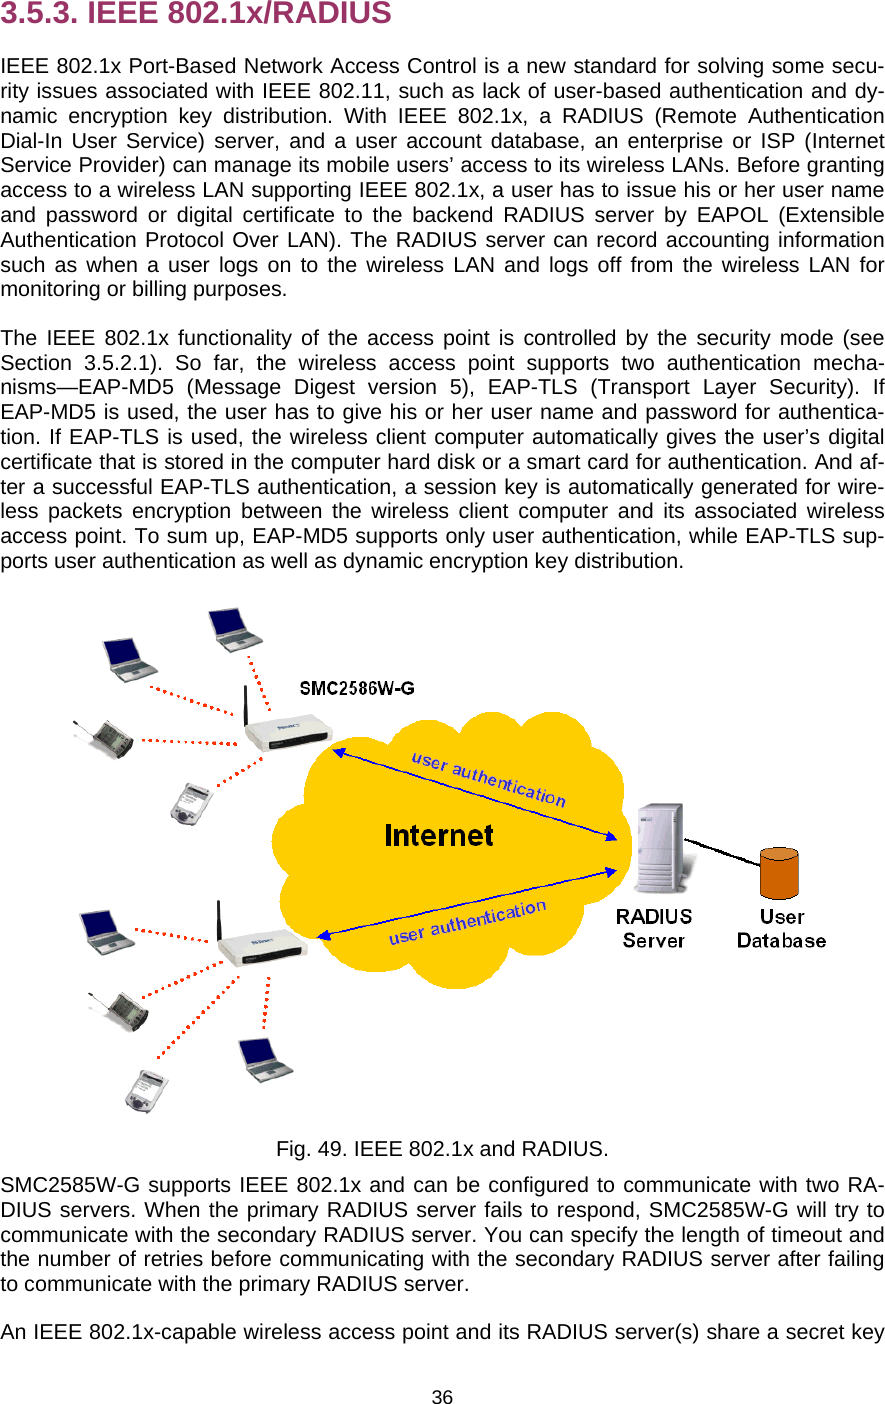   363.5.3. IEEE 802.1x/RADIUS IEEE 802.1x Port-Based Network Access Control is a new standard for solving some secu-rity issues associated with IEEE 802.11, such as lack of user-based authentication and dy-namic encryption key distribution. With IEEE 802.1x, a RADIUS (Remote Authentication Dial-In User Service) server, and a user account database, an enterprise or ISP (Internet Service Provider) can manage its mobile users’ access to its wireless LANs. Before granting access to a wireless LAN supporting IEEE 802.1x, a user has to issue his or her user name and password or digital certificate to the backend RADIUS server by EAPOL (Extensible Authentication Protocol Over LAN). The RADIUS server can record accounting information such as when a user logs on to the wireless LAN and logs off from the wireless LAN for monitoring or billing purposes. The IEEE 802.1x functionality of the access point is controlled by the security mode (see Section 3.5.2.1). So far, the wireless access point supports two authentication mecha-nisms—EAP-MD5 (Message Digest version 5), EAP-TLS (Transport Layer Security). If EAP-MD5 is used, the user has to give his or her user name and password for authentica-tion. If EAP-TLS is used, the wireless client computer automatically gives the user’s digital certificate that is stored in the computer hard disk or a smart card for authentication. And af-ter a successful EAP-TLS authentication, a session key is automatically generated for wire-less packets encryption between the wireless client computer and its associated wireless access point. To sum up, EAP-MD5 supports only user authentication, while EAP-TLS sup-ports user authentication as well as dynamic encryption key distribution.  Fig. 49. IEEE 802.1x and RADIUS. SMC2585W-G supports IEEE 802.1x and can be configured to communicate with two RA-DIUS servers. When the primary RADIUS server fails to respond, SMC2585W-G will try to communicate with the secondary RADIUS server. You can specify the length of timeout and the number of retries before communicating with the secondary RADIUS server after failing to communicate with the primary RADIUS server. An IEEE 802.1x-capable wireless access point and its RADIUS server(s) share a secret key 